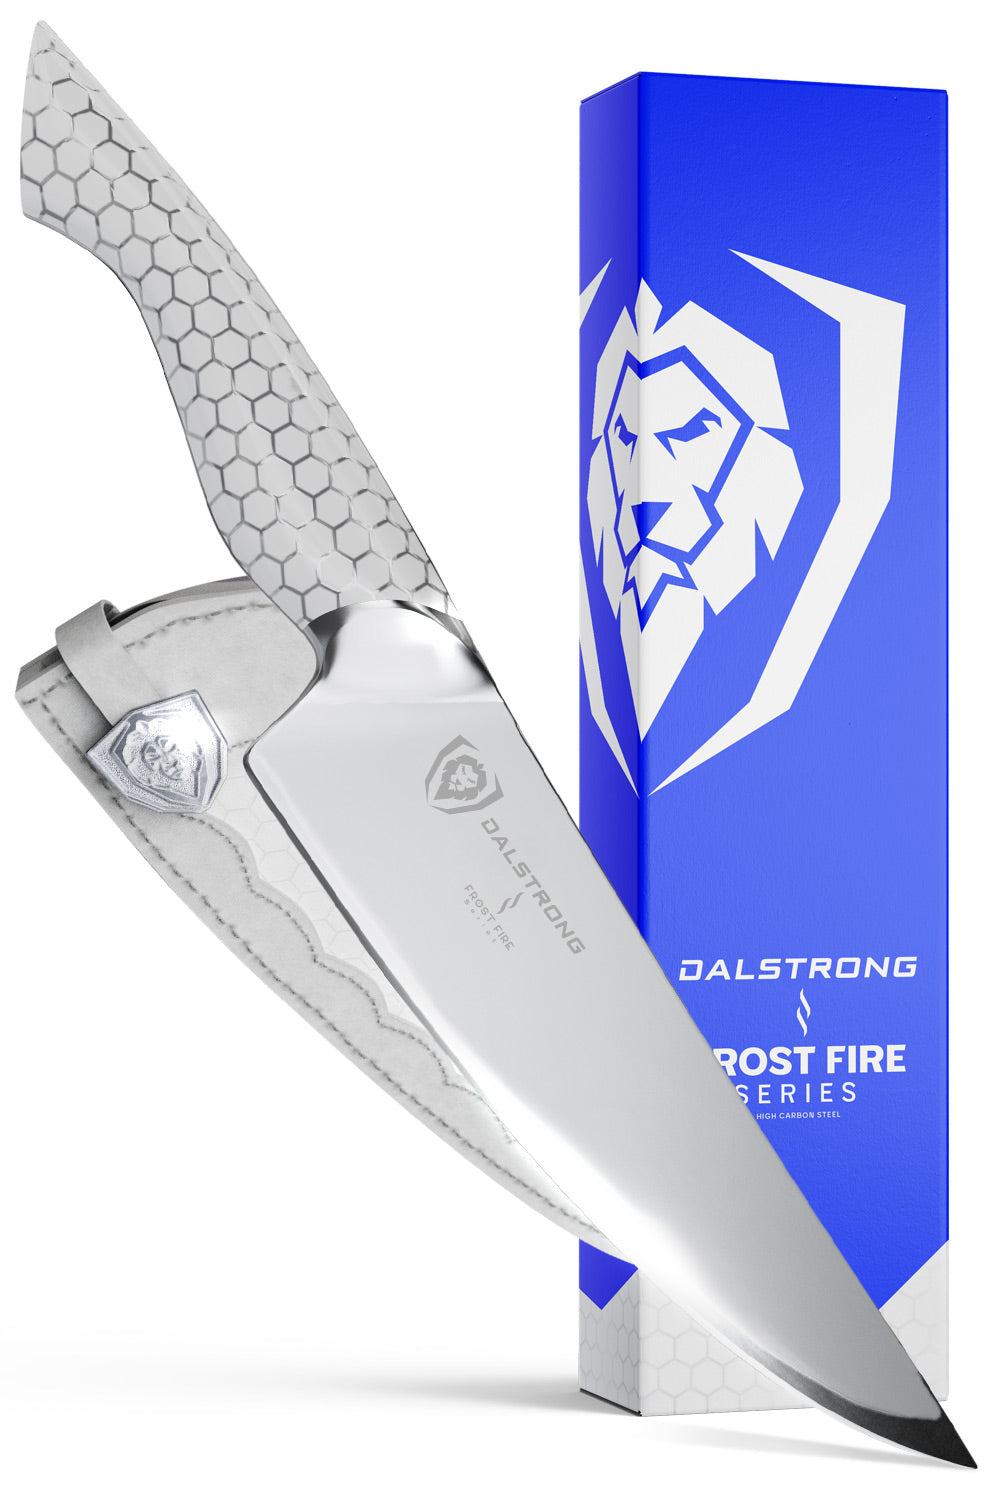 Dalstrong frost fire series 8 inch chef knife in front of it's premium packaging.